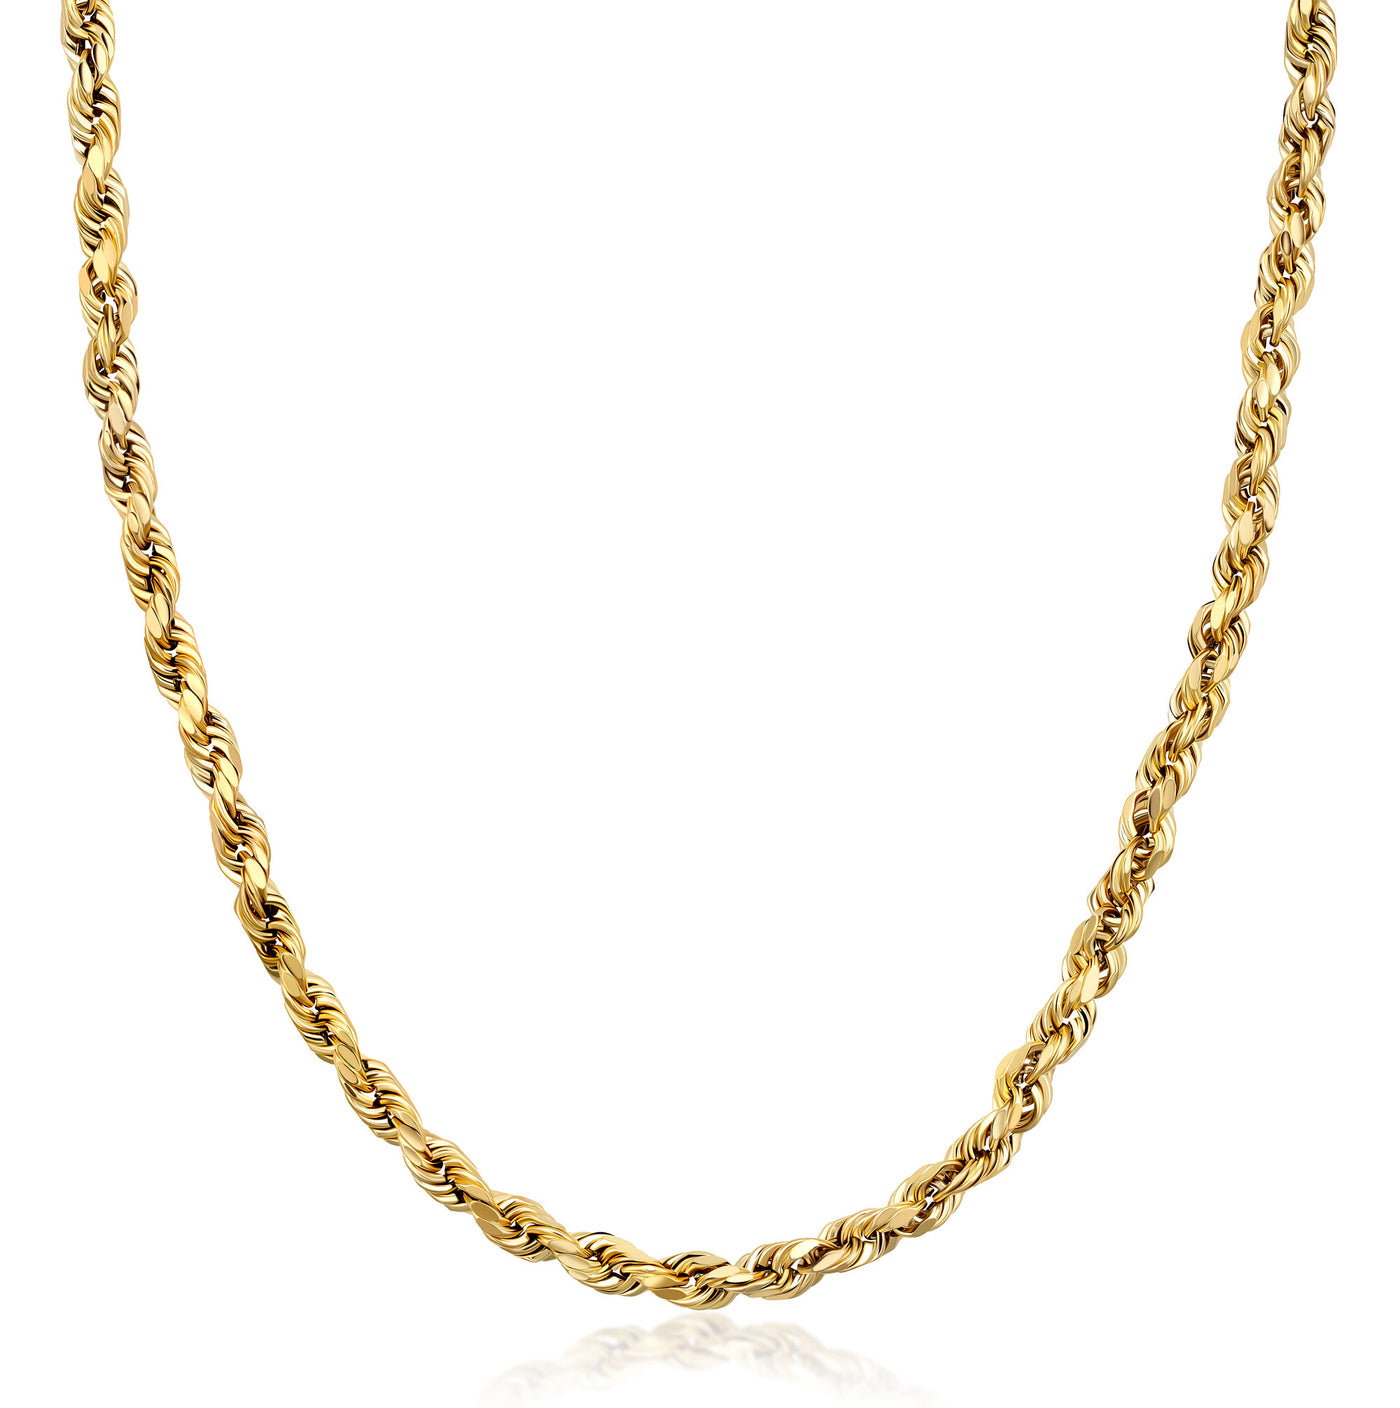 Men's 18K Gold Rope Chain Necklaces